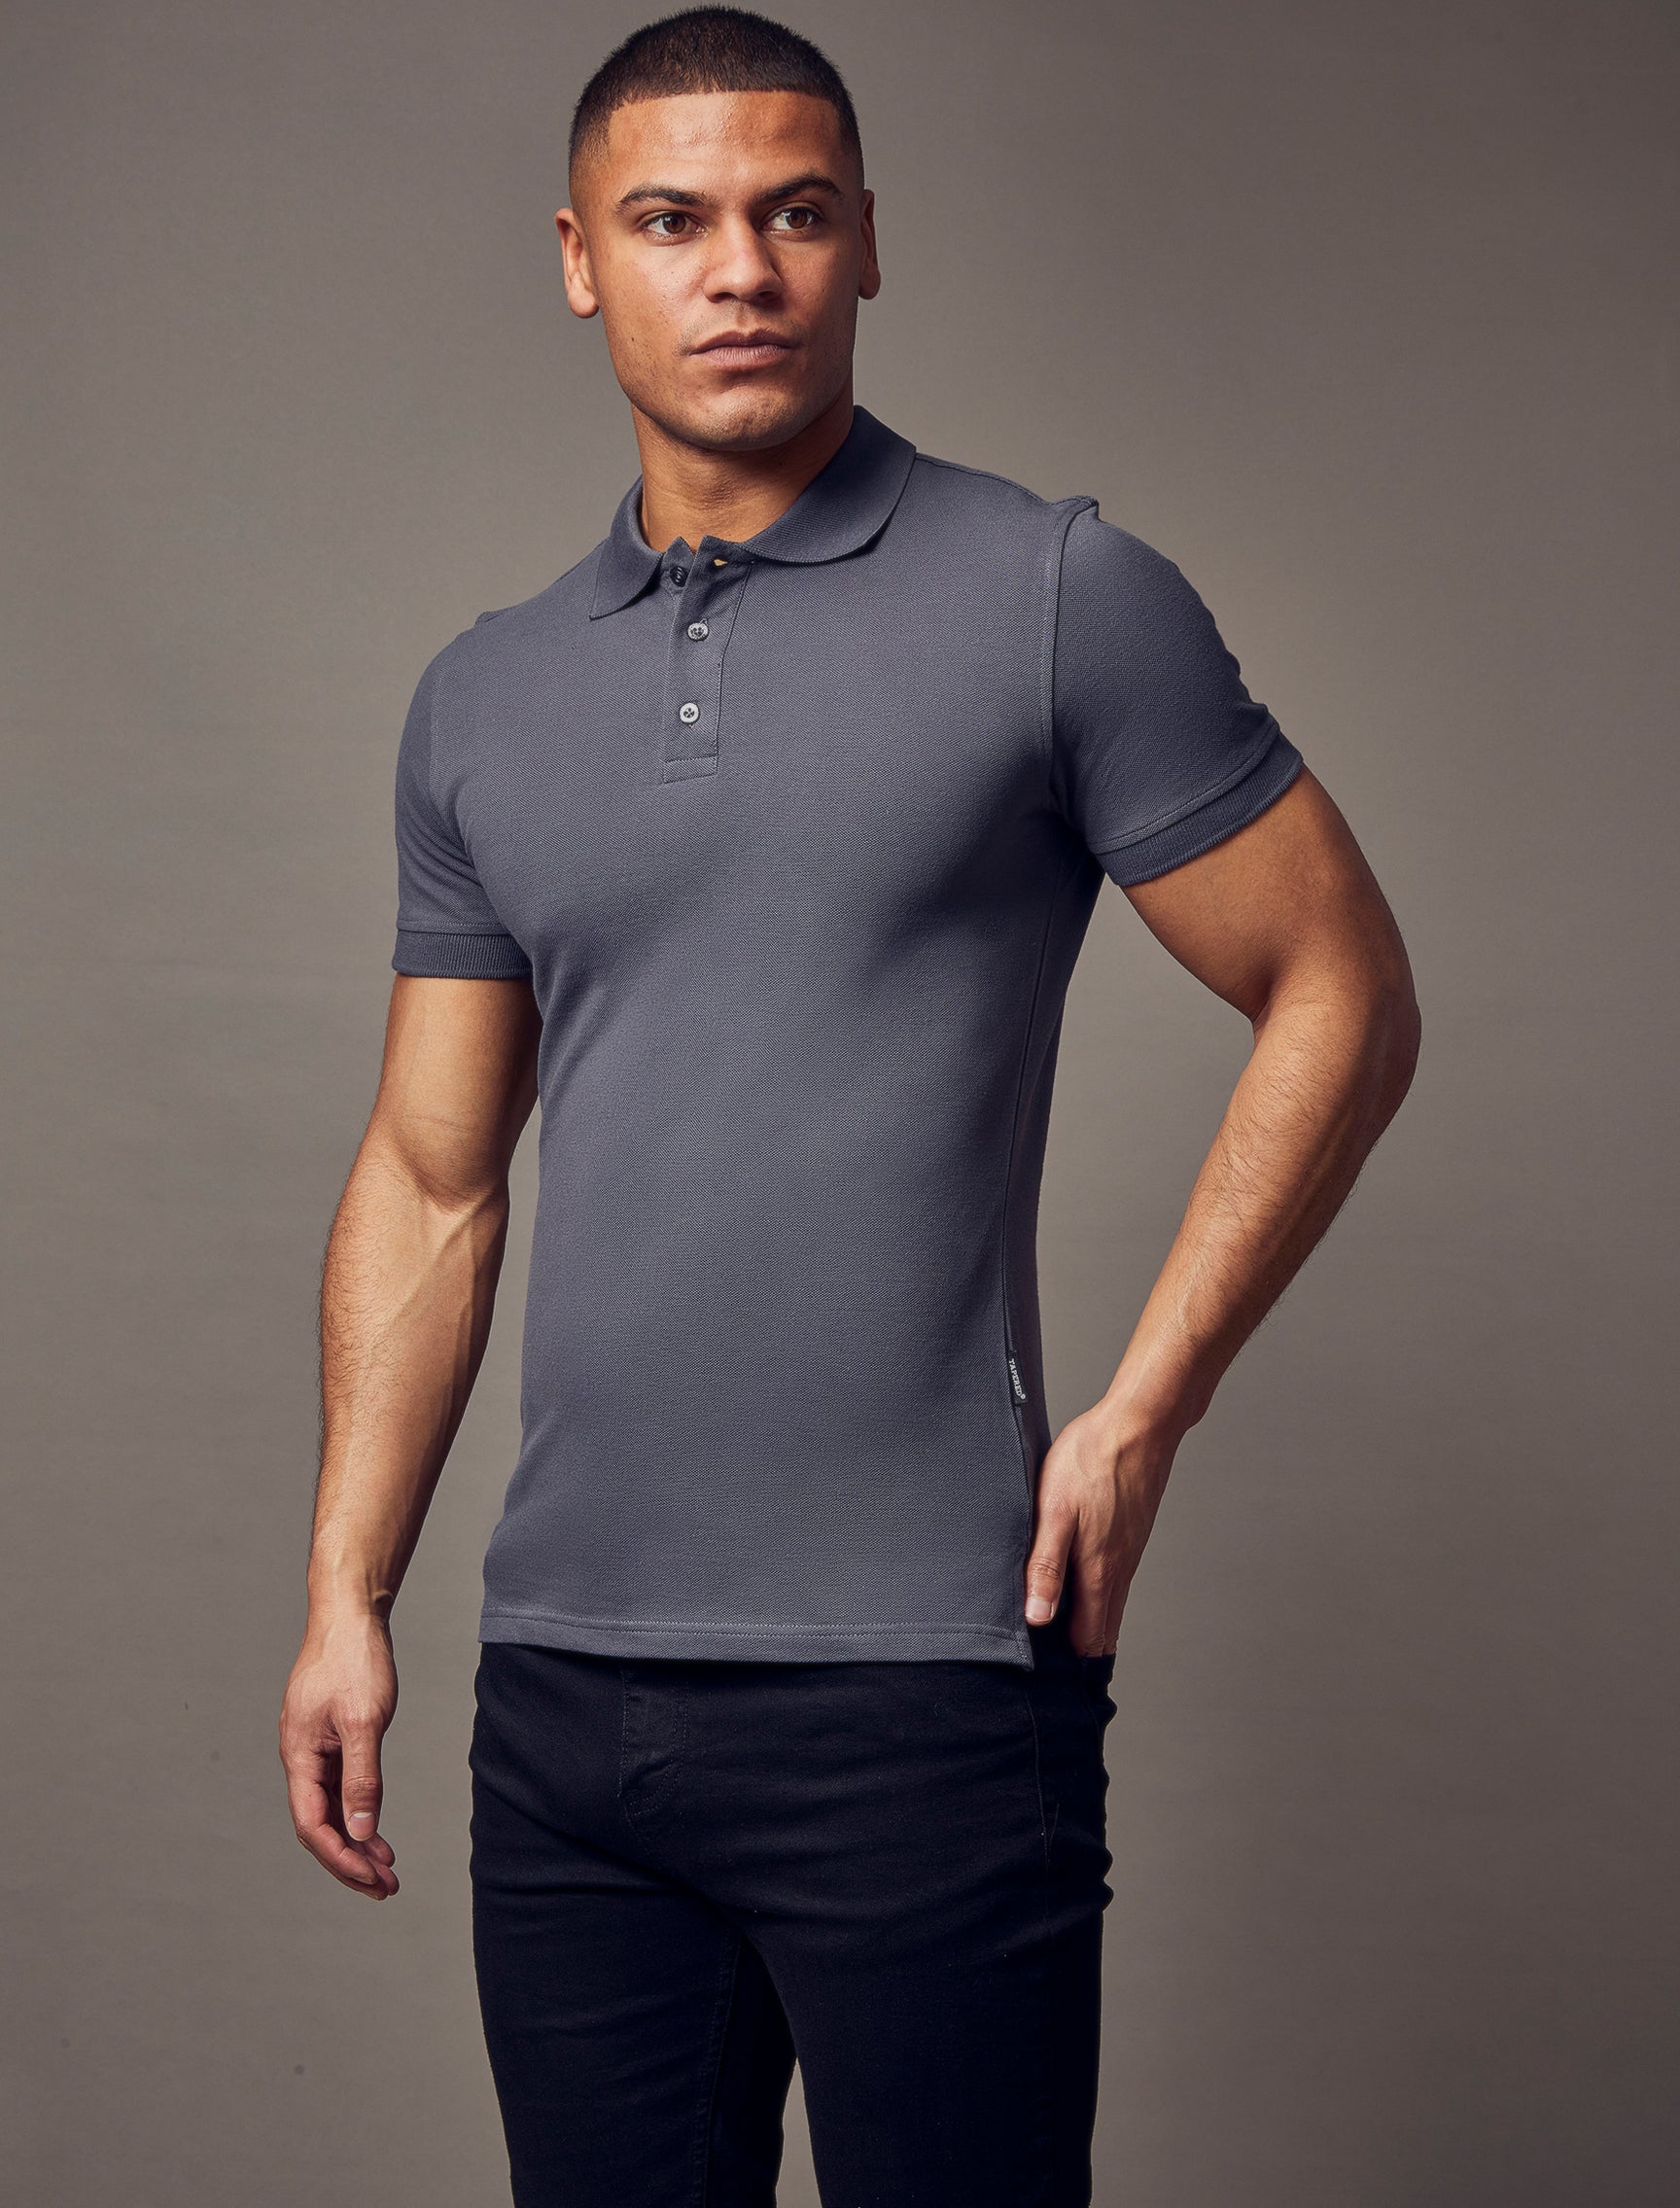 Muscle Fit Polo Shirts | Tapered Fit Polos | Tapered Menswear